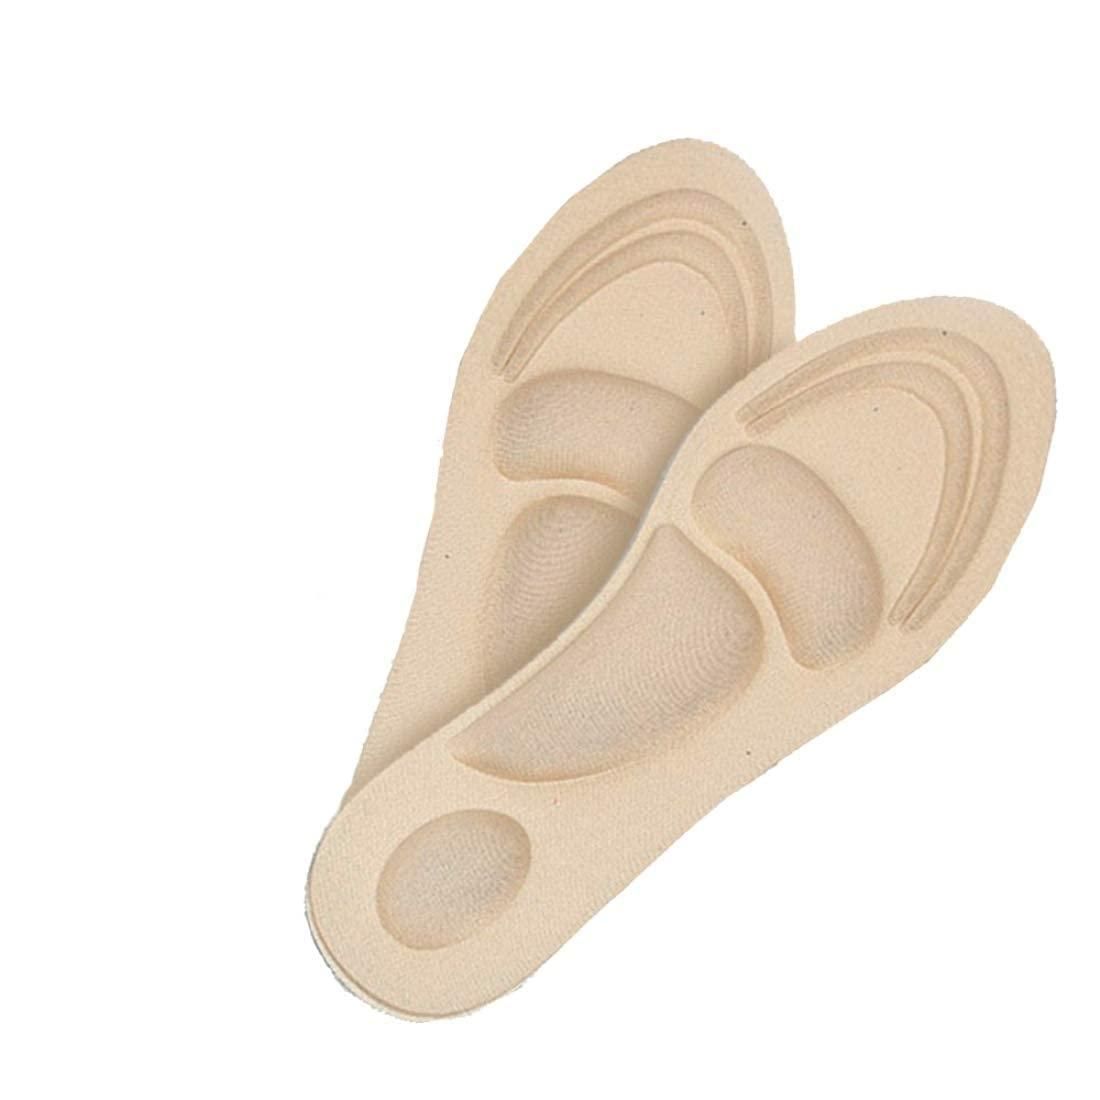 Flat Feet Arch Heel for Foot Support Orthopedic Insole